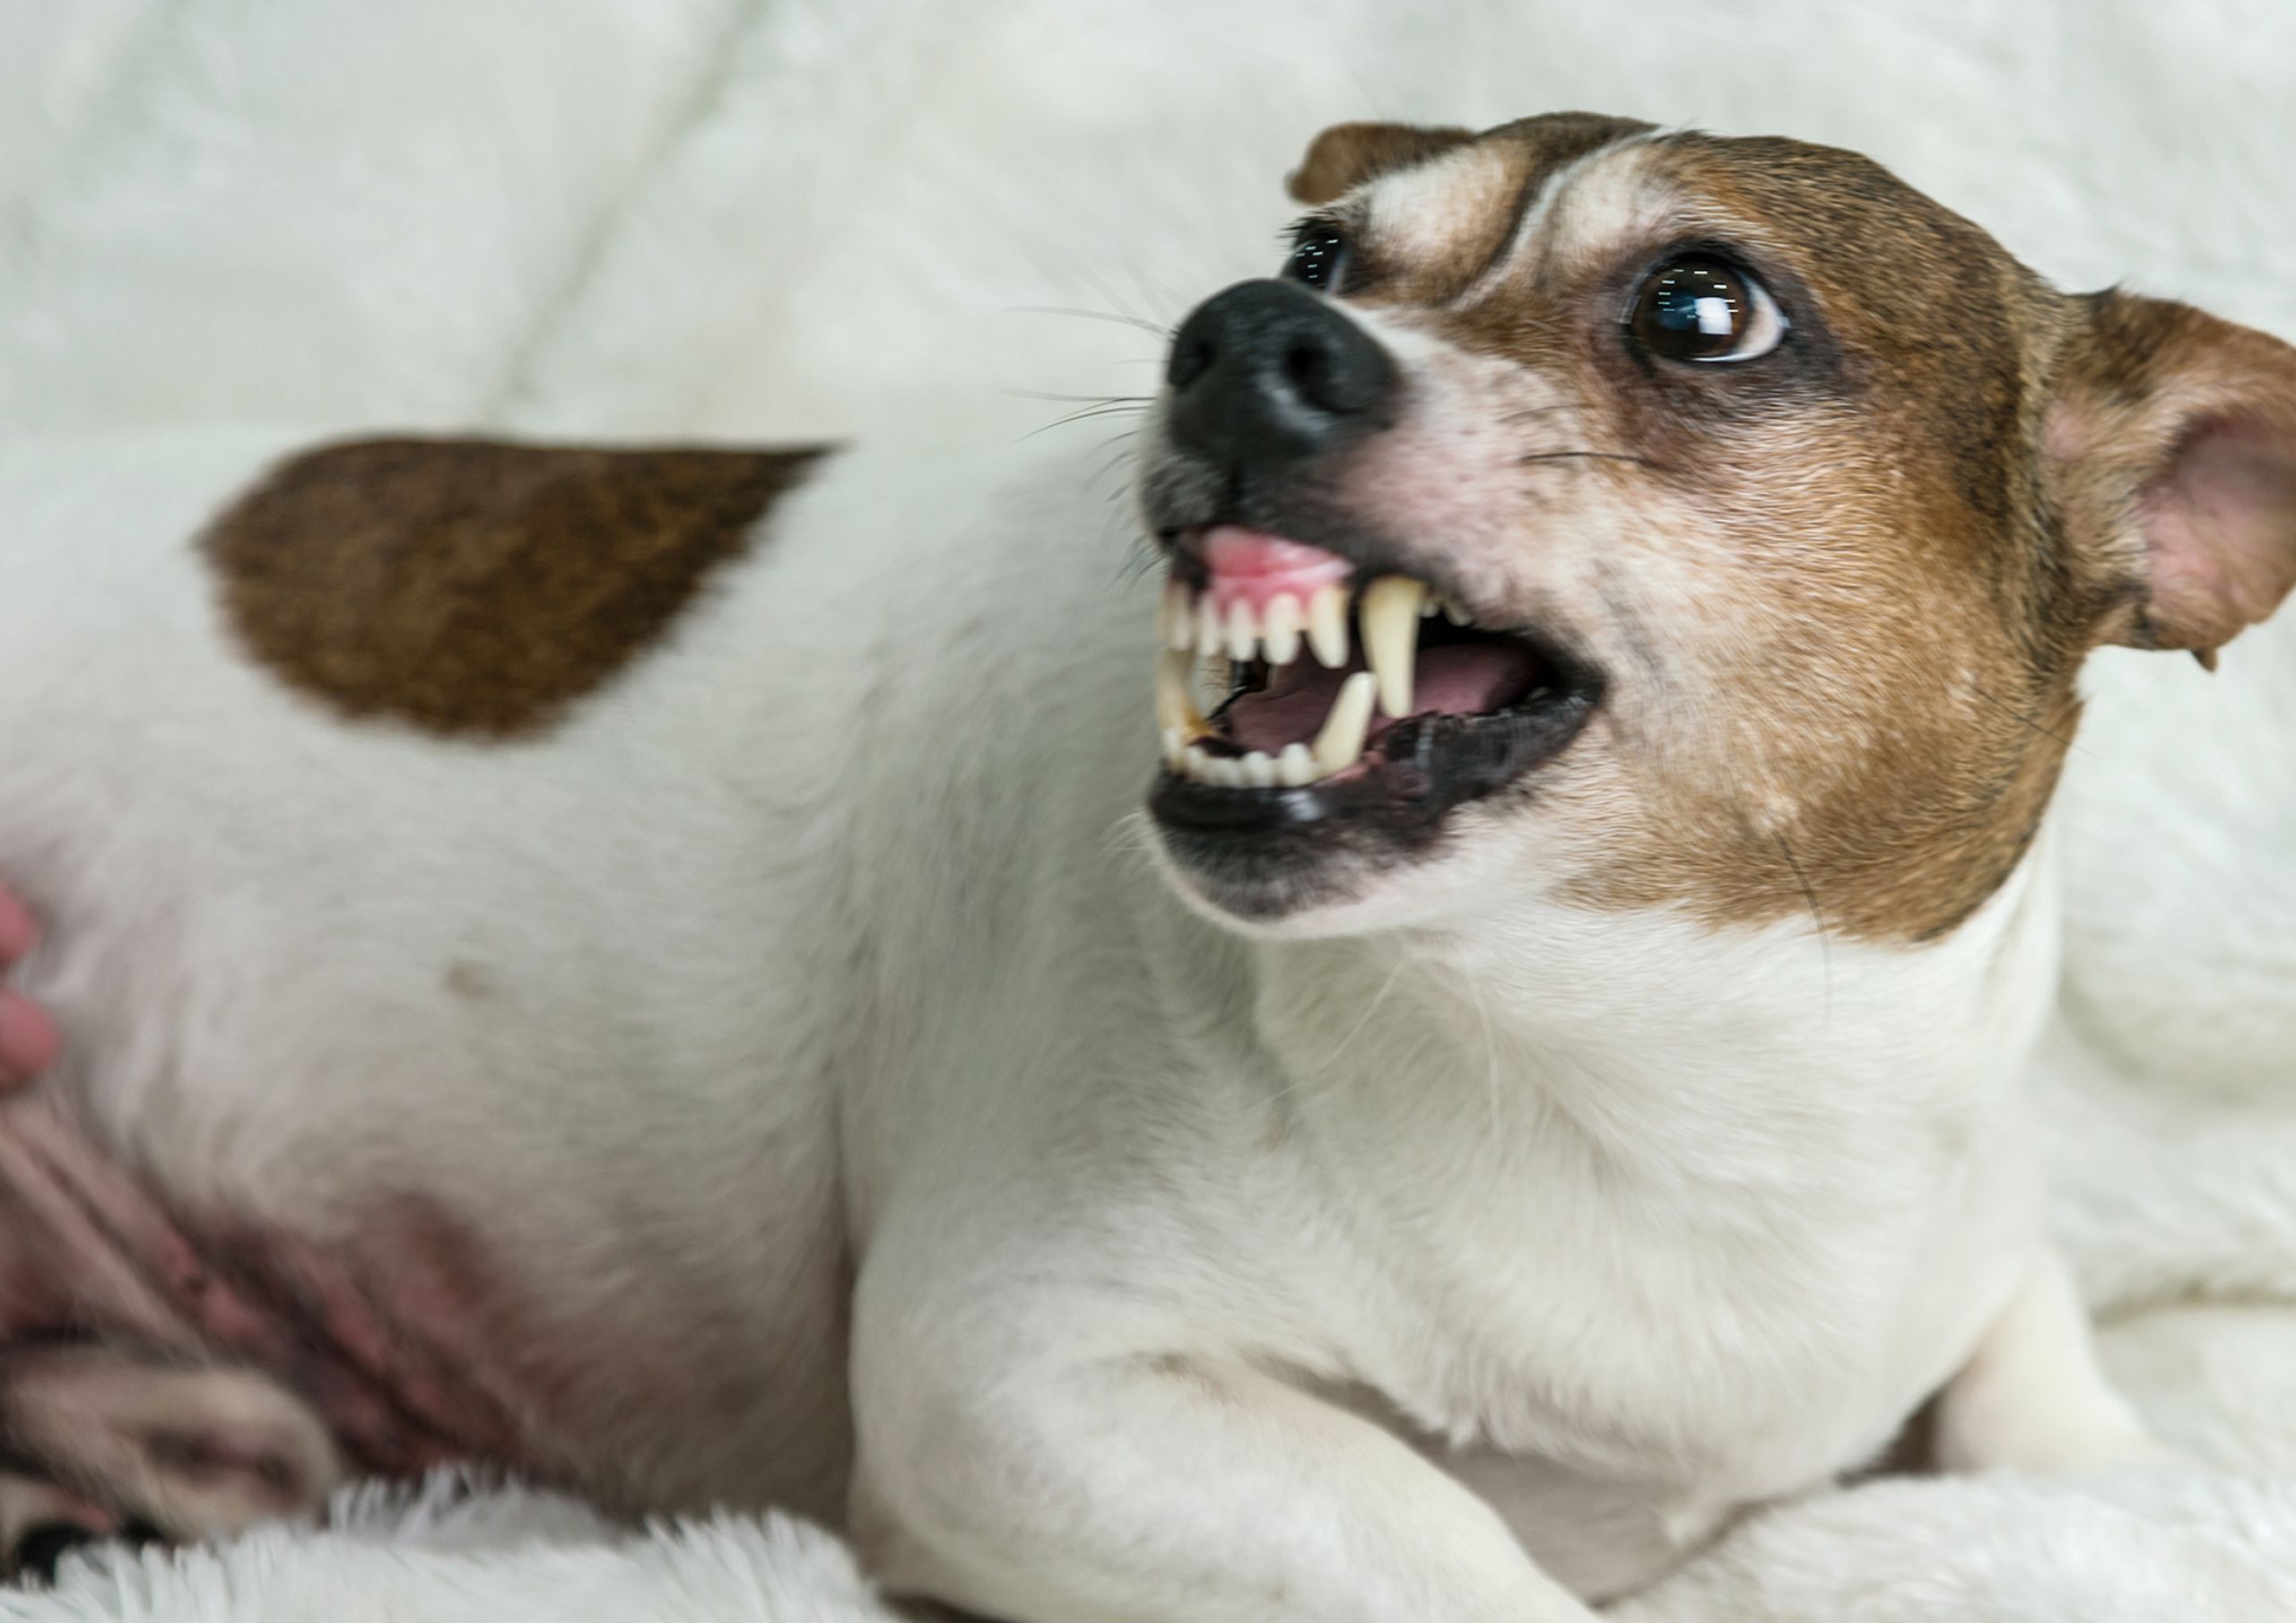 White and brown Jack Russell terrier dog growling and snarling with whale eye and ears pinned back at camera